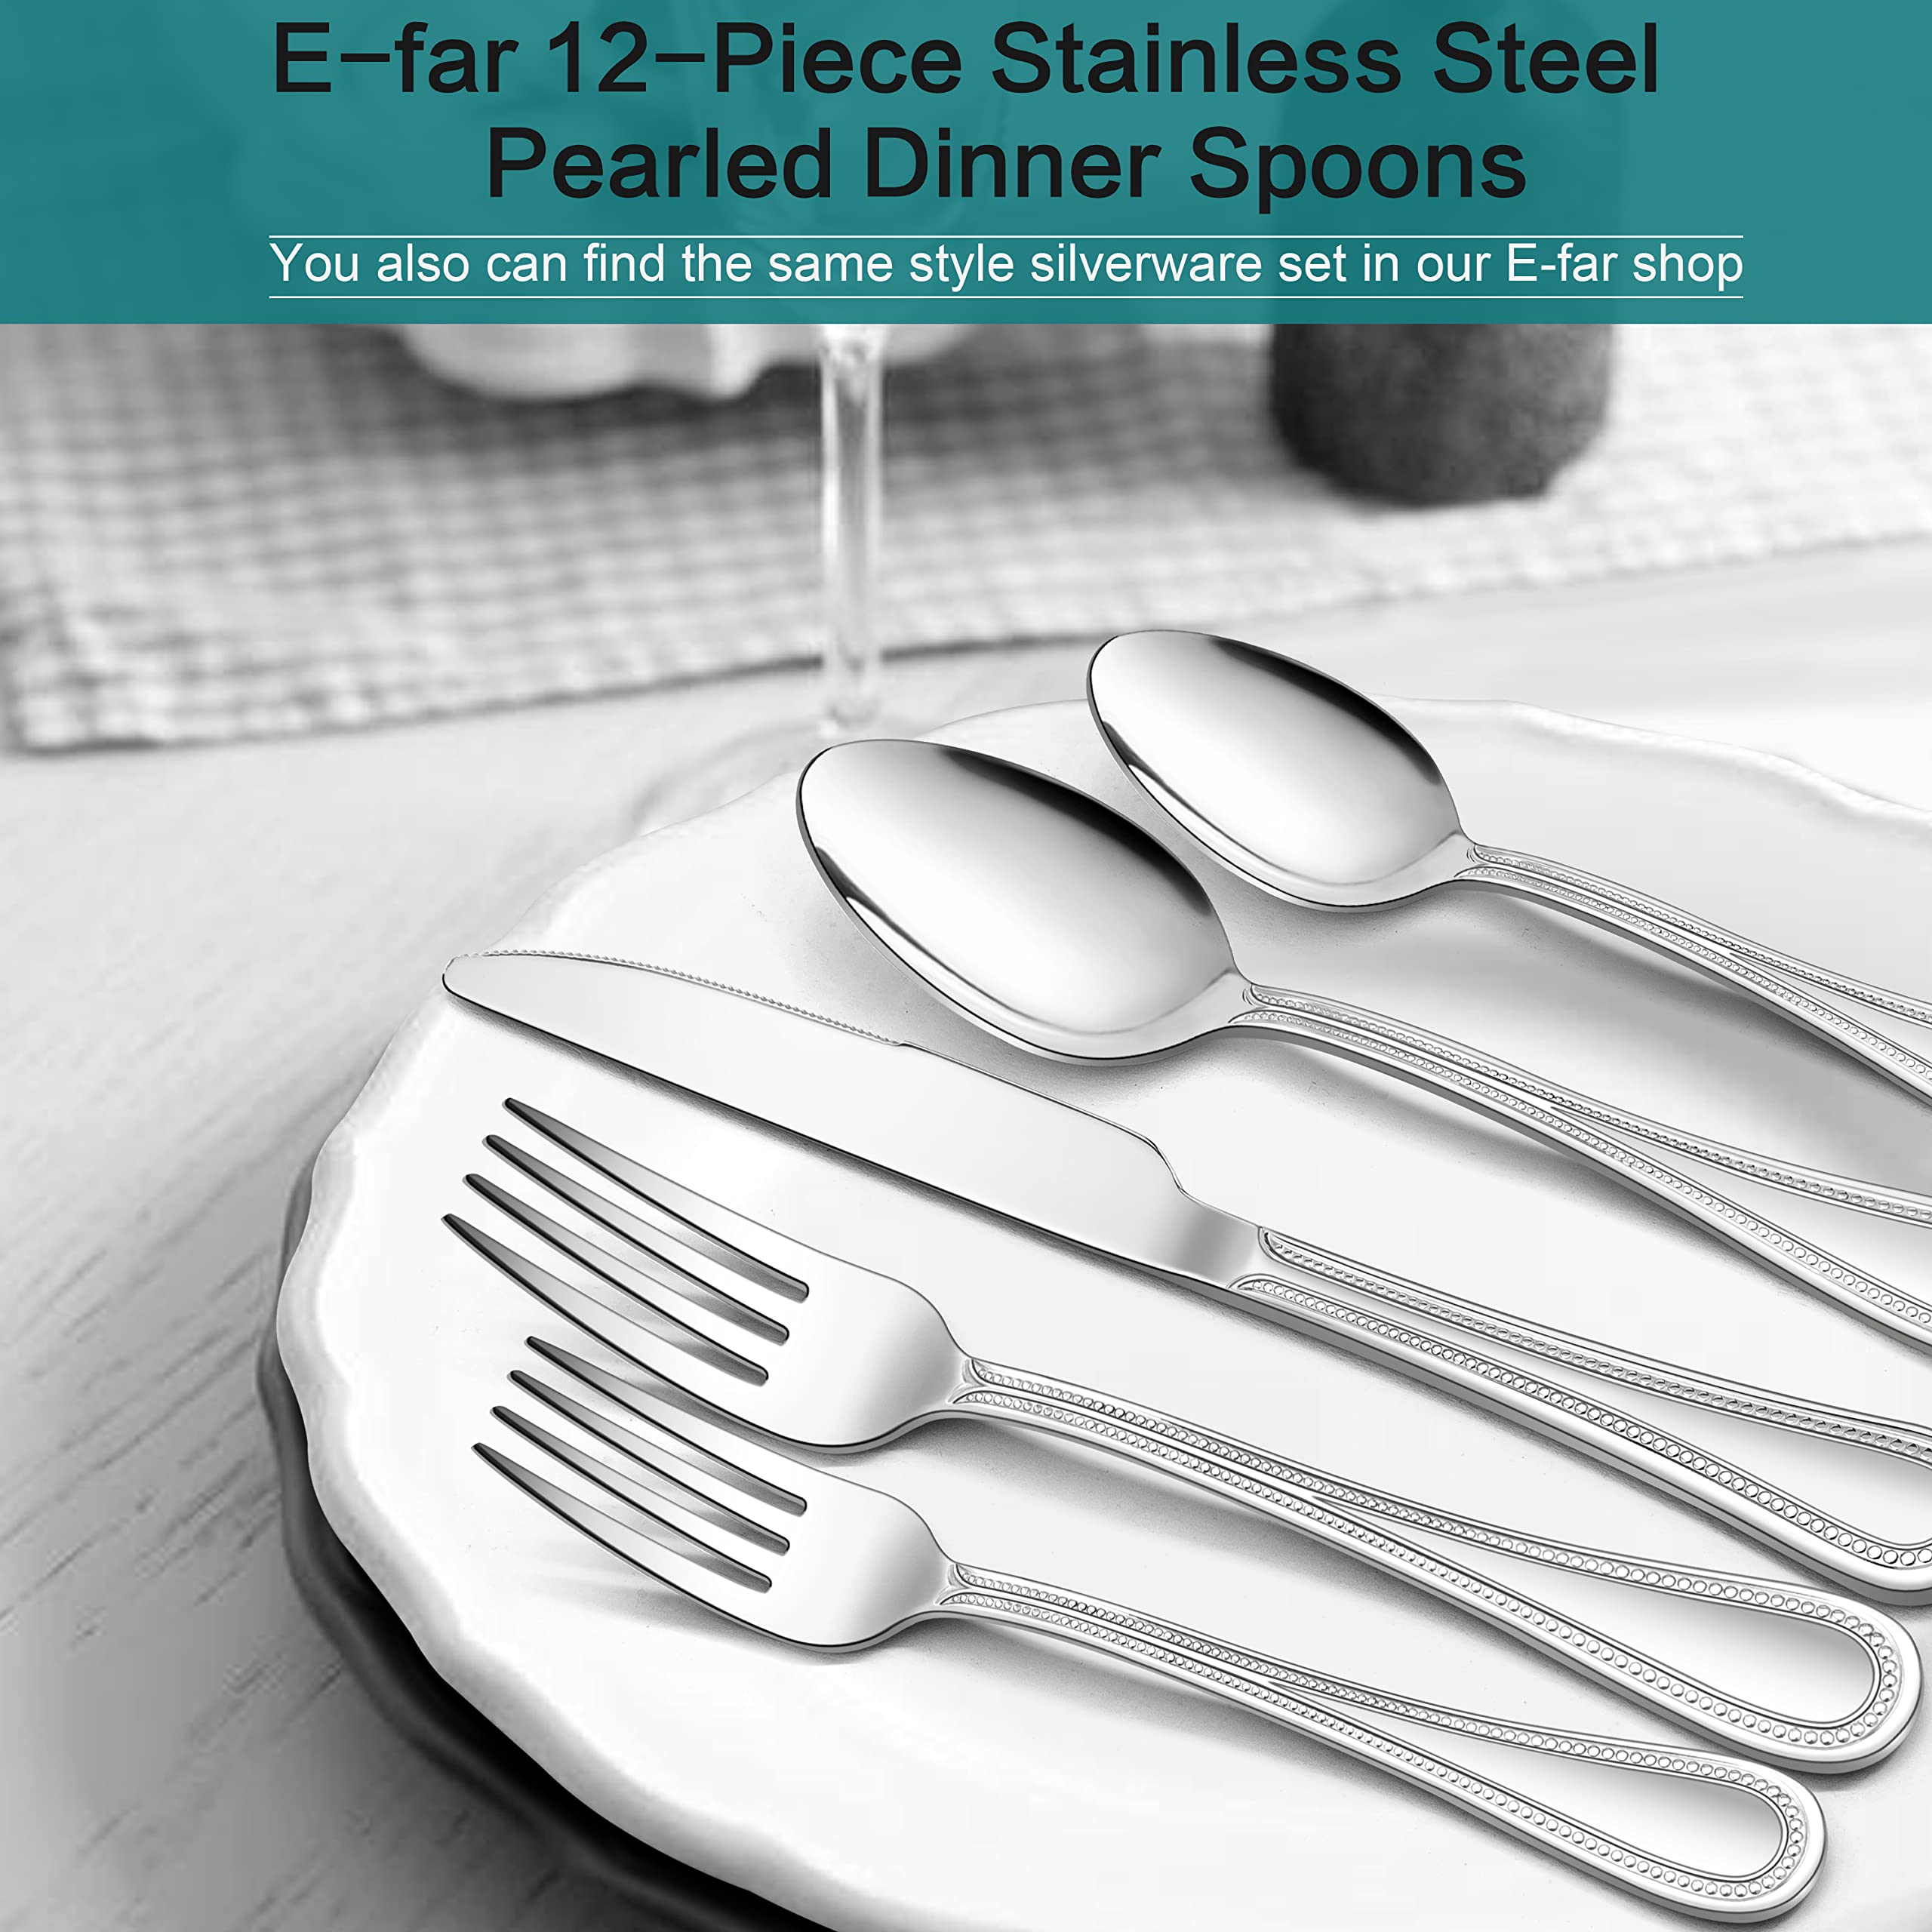 Dinner Spoons Set of 12, E-far Stainless Steel Spoons Silverware with Pearled Edge for Home/Kitchen/Restaurant, Mirror Polished & Dishwasher safe-7.9 Inches